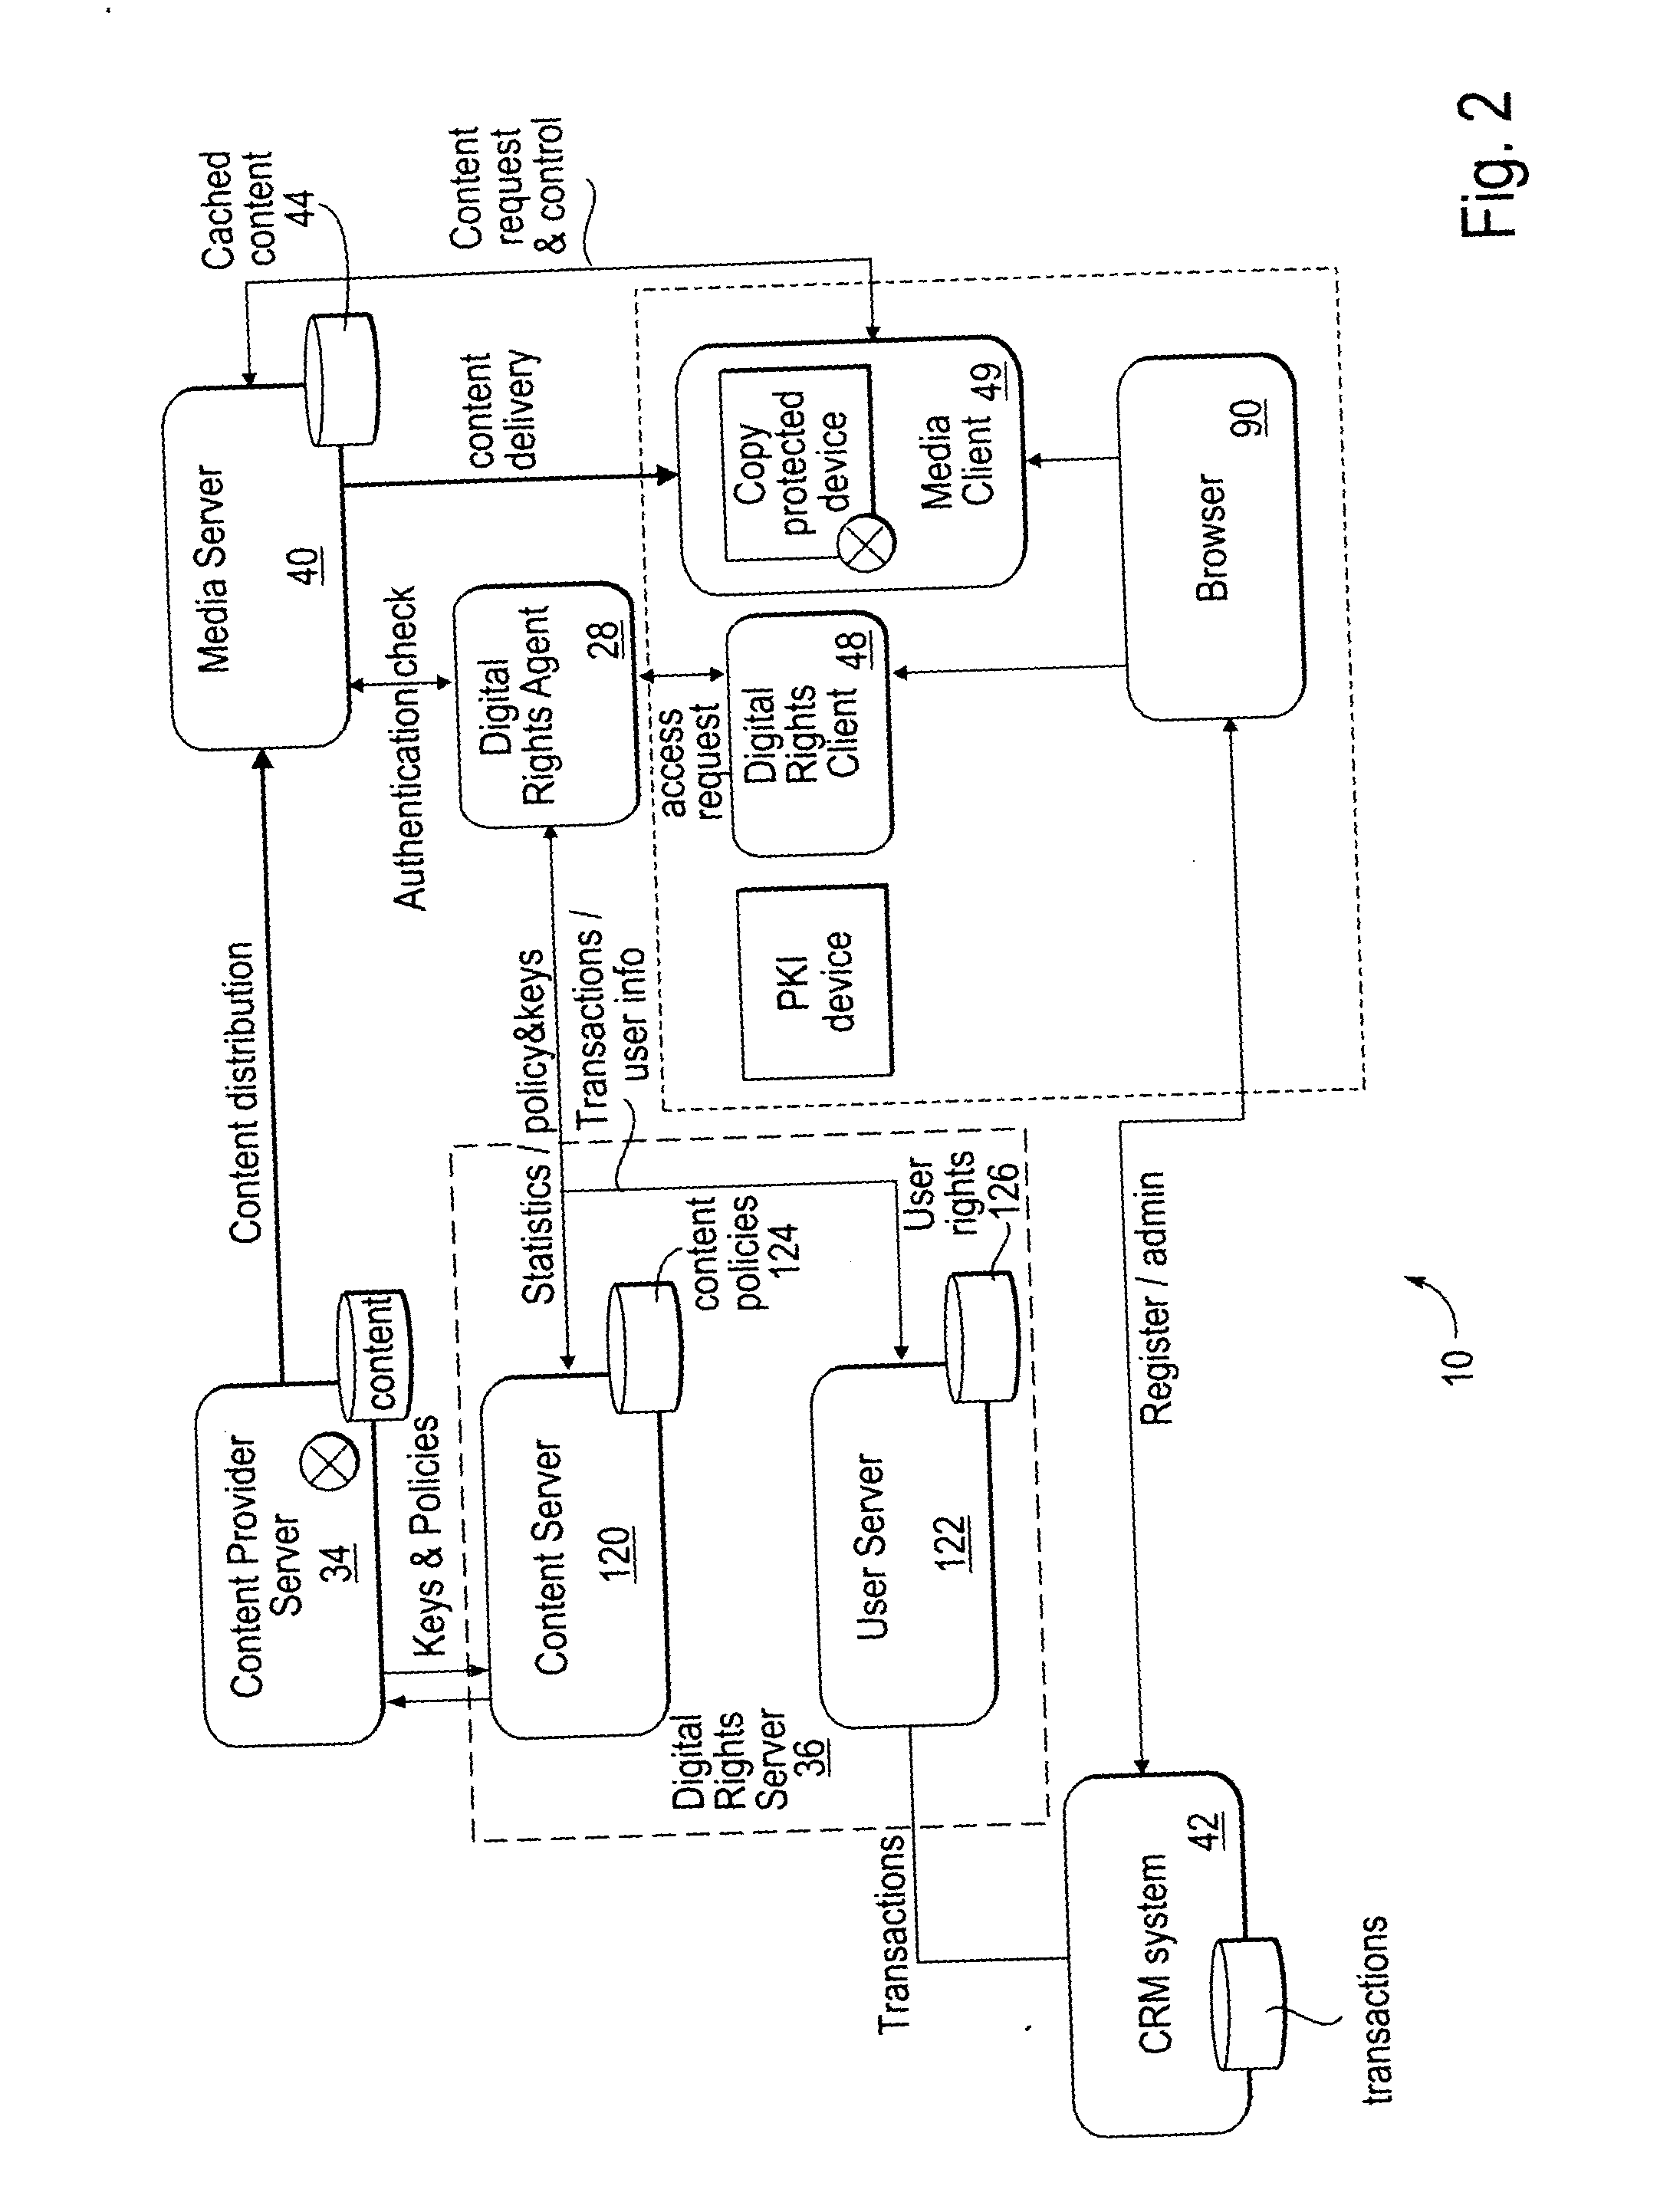 Method and system to monitor delivery of content to a content destination